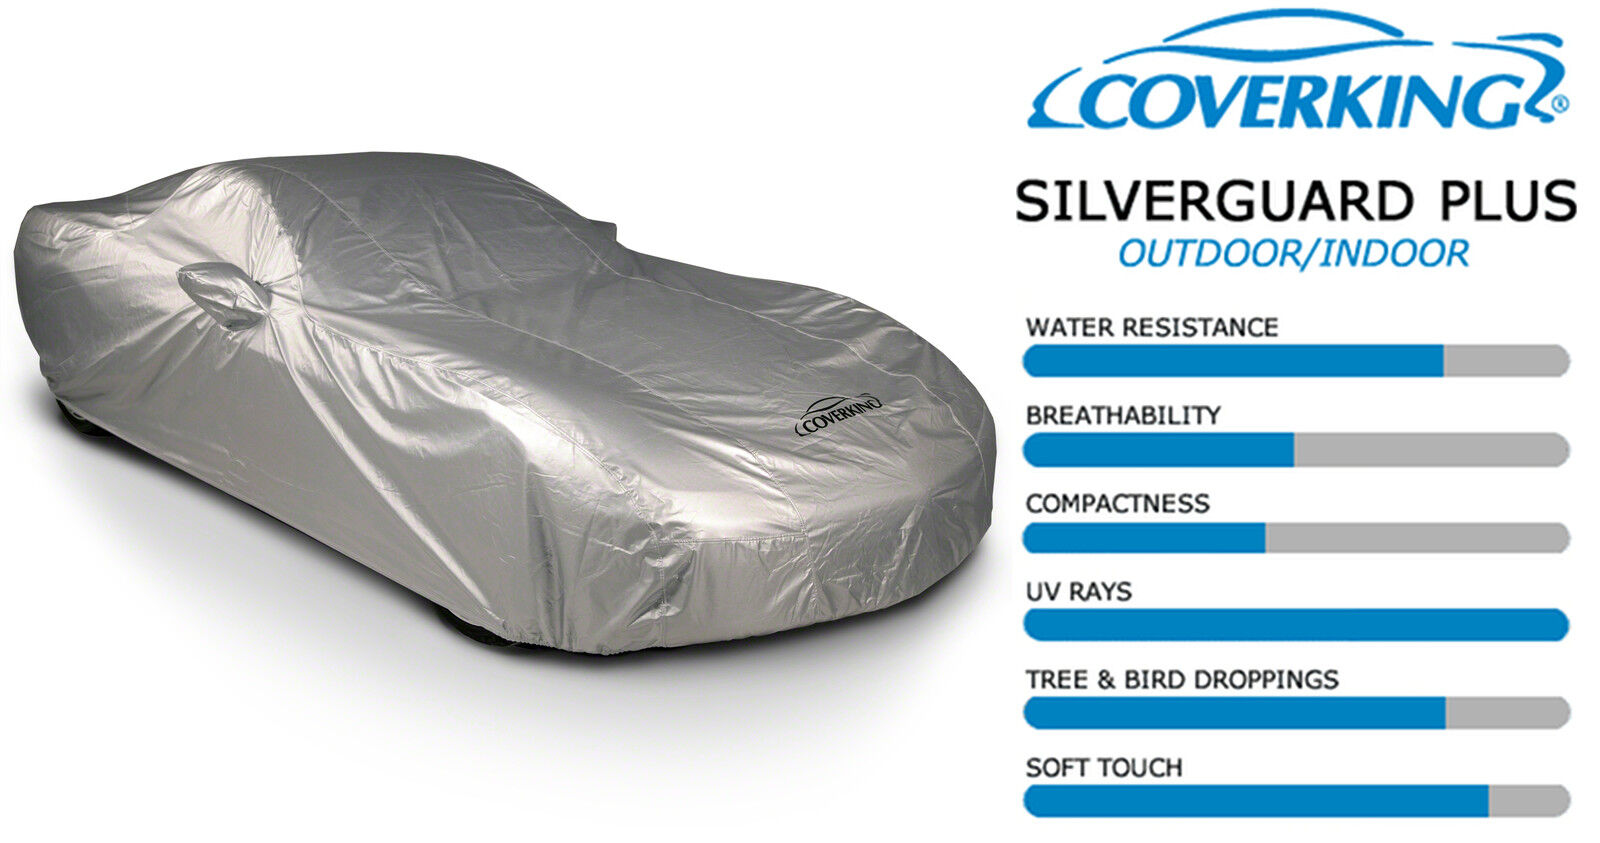 COVERKING SILVERGUARD PLUS all-weather CAR COVER made for 2015 Volkswagen Golf